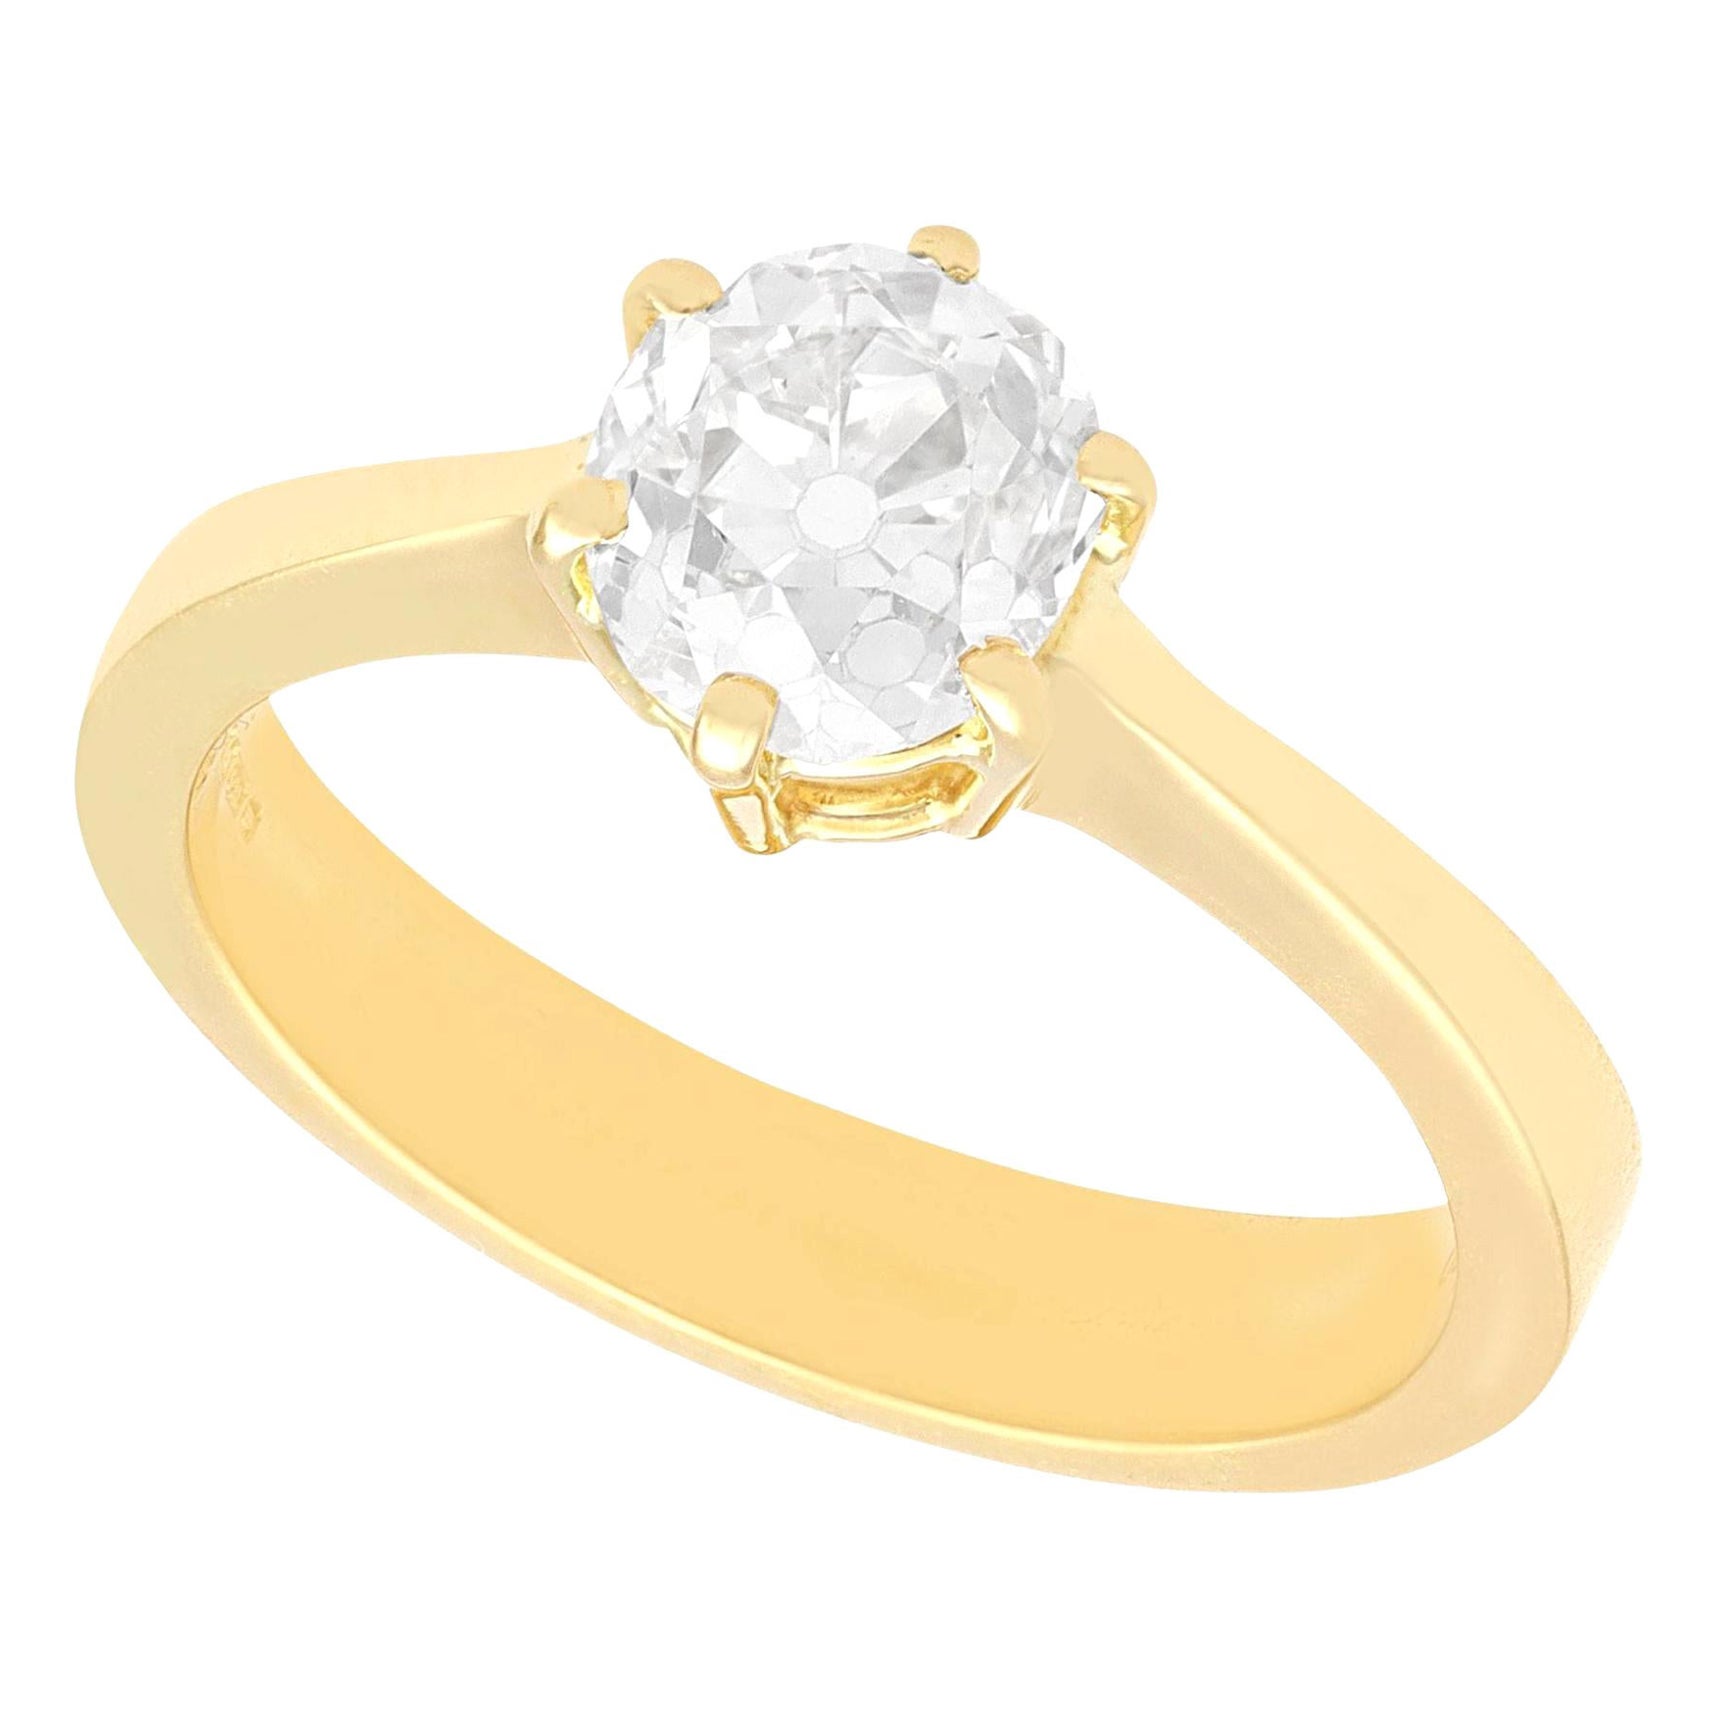 1.38 Carat Diamond 18k Yellow Gold Solitaire Engagement Ring